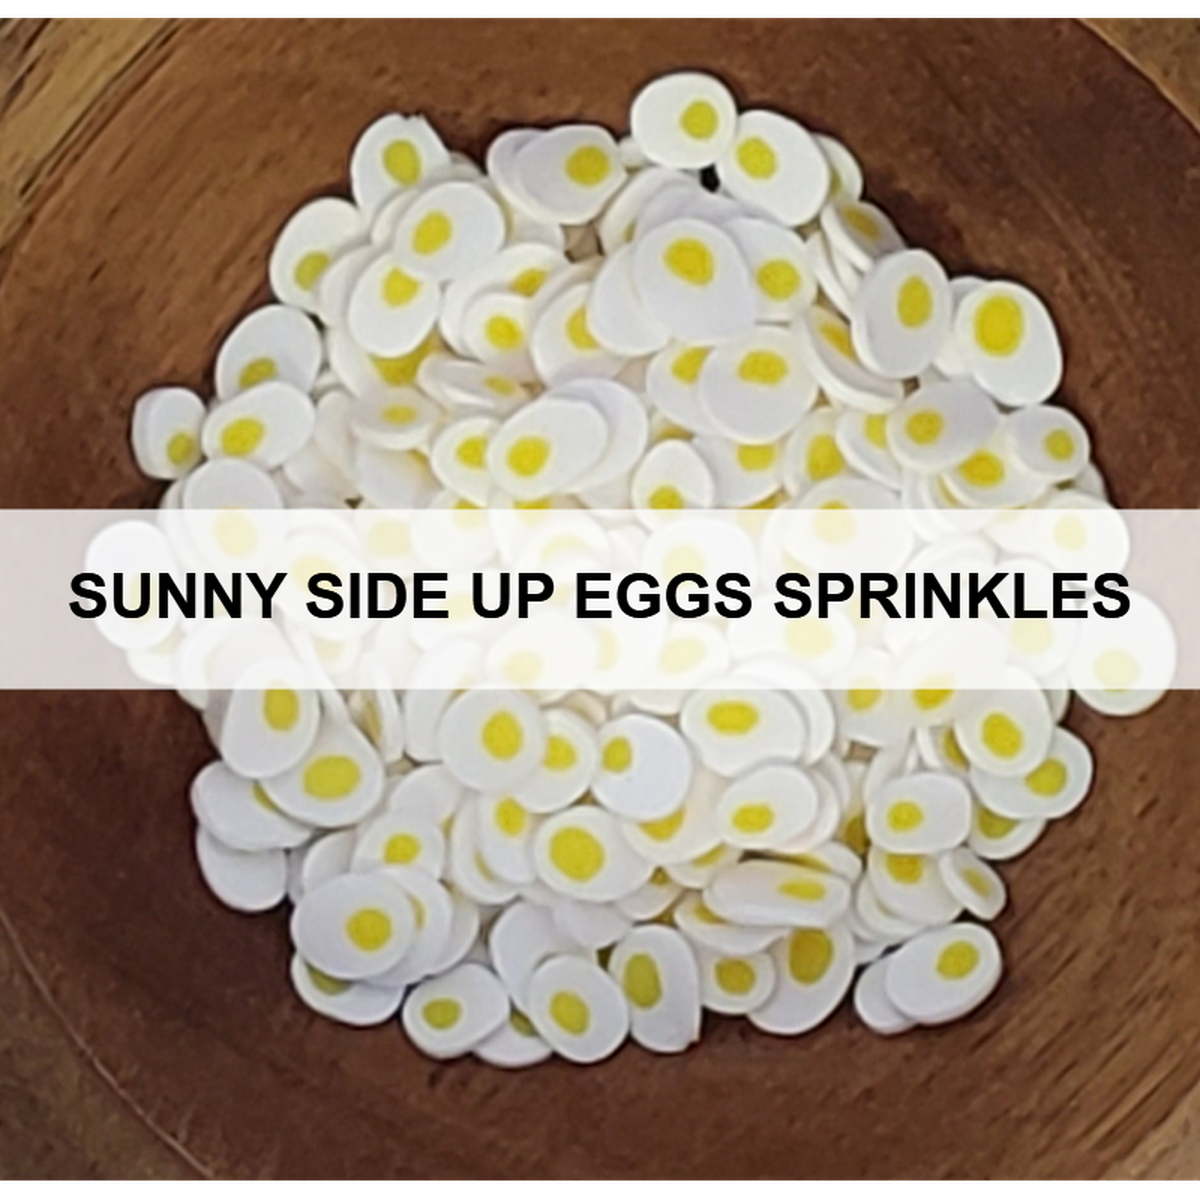 Sunny Side Up Eggs Sprinkles by Kat Scrappiness - Kat Scrappiness